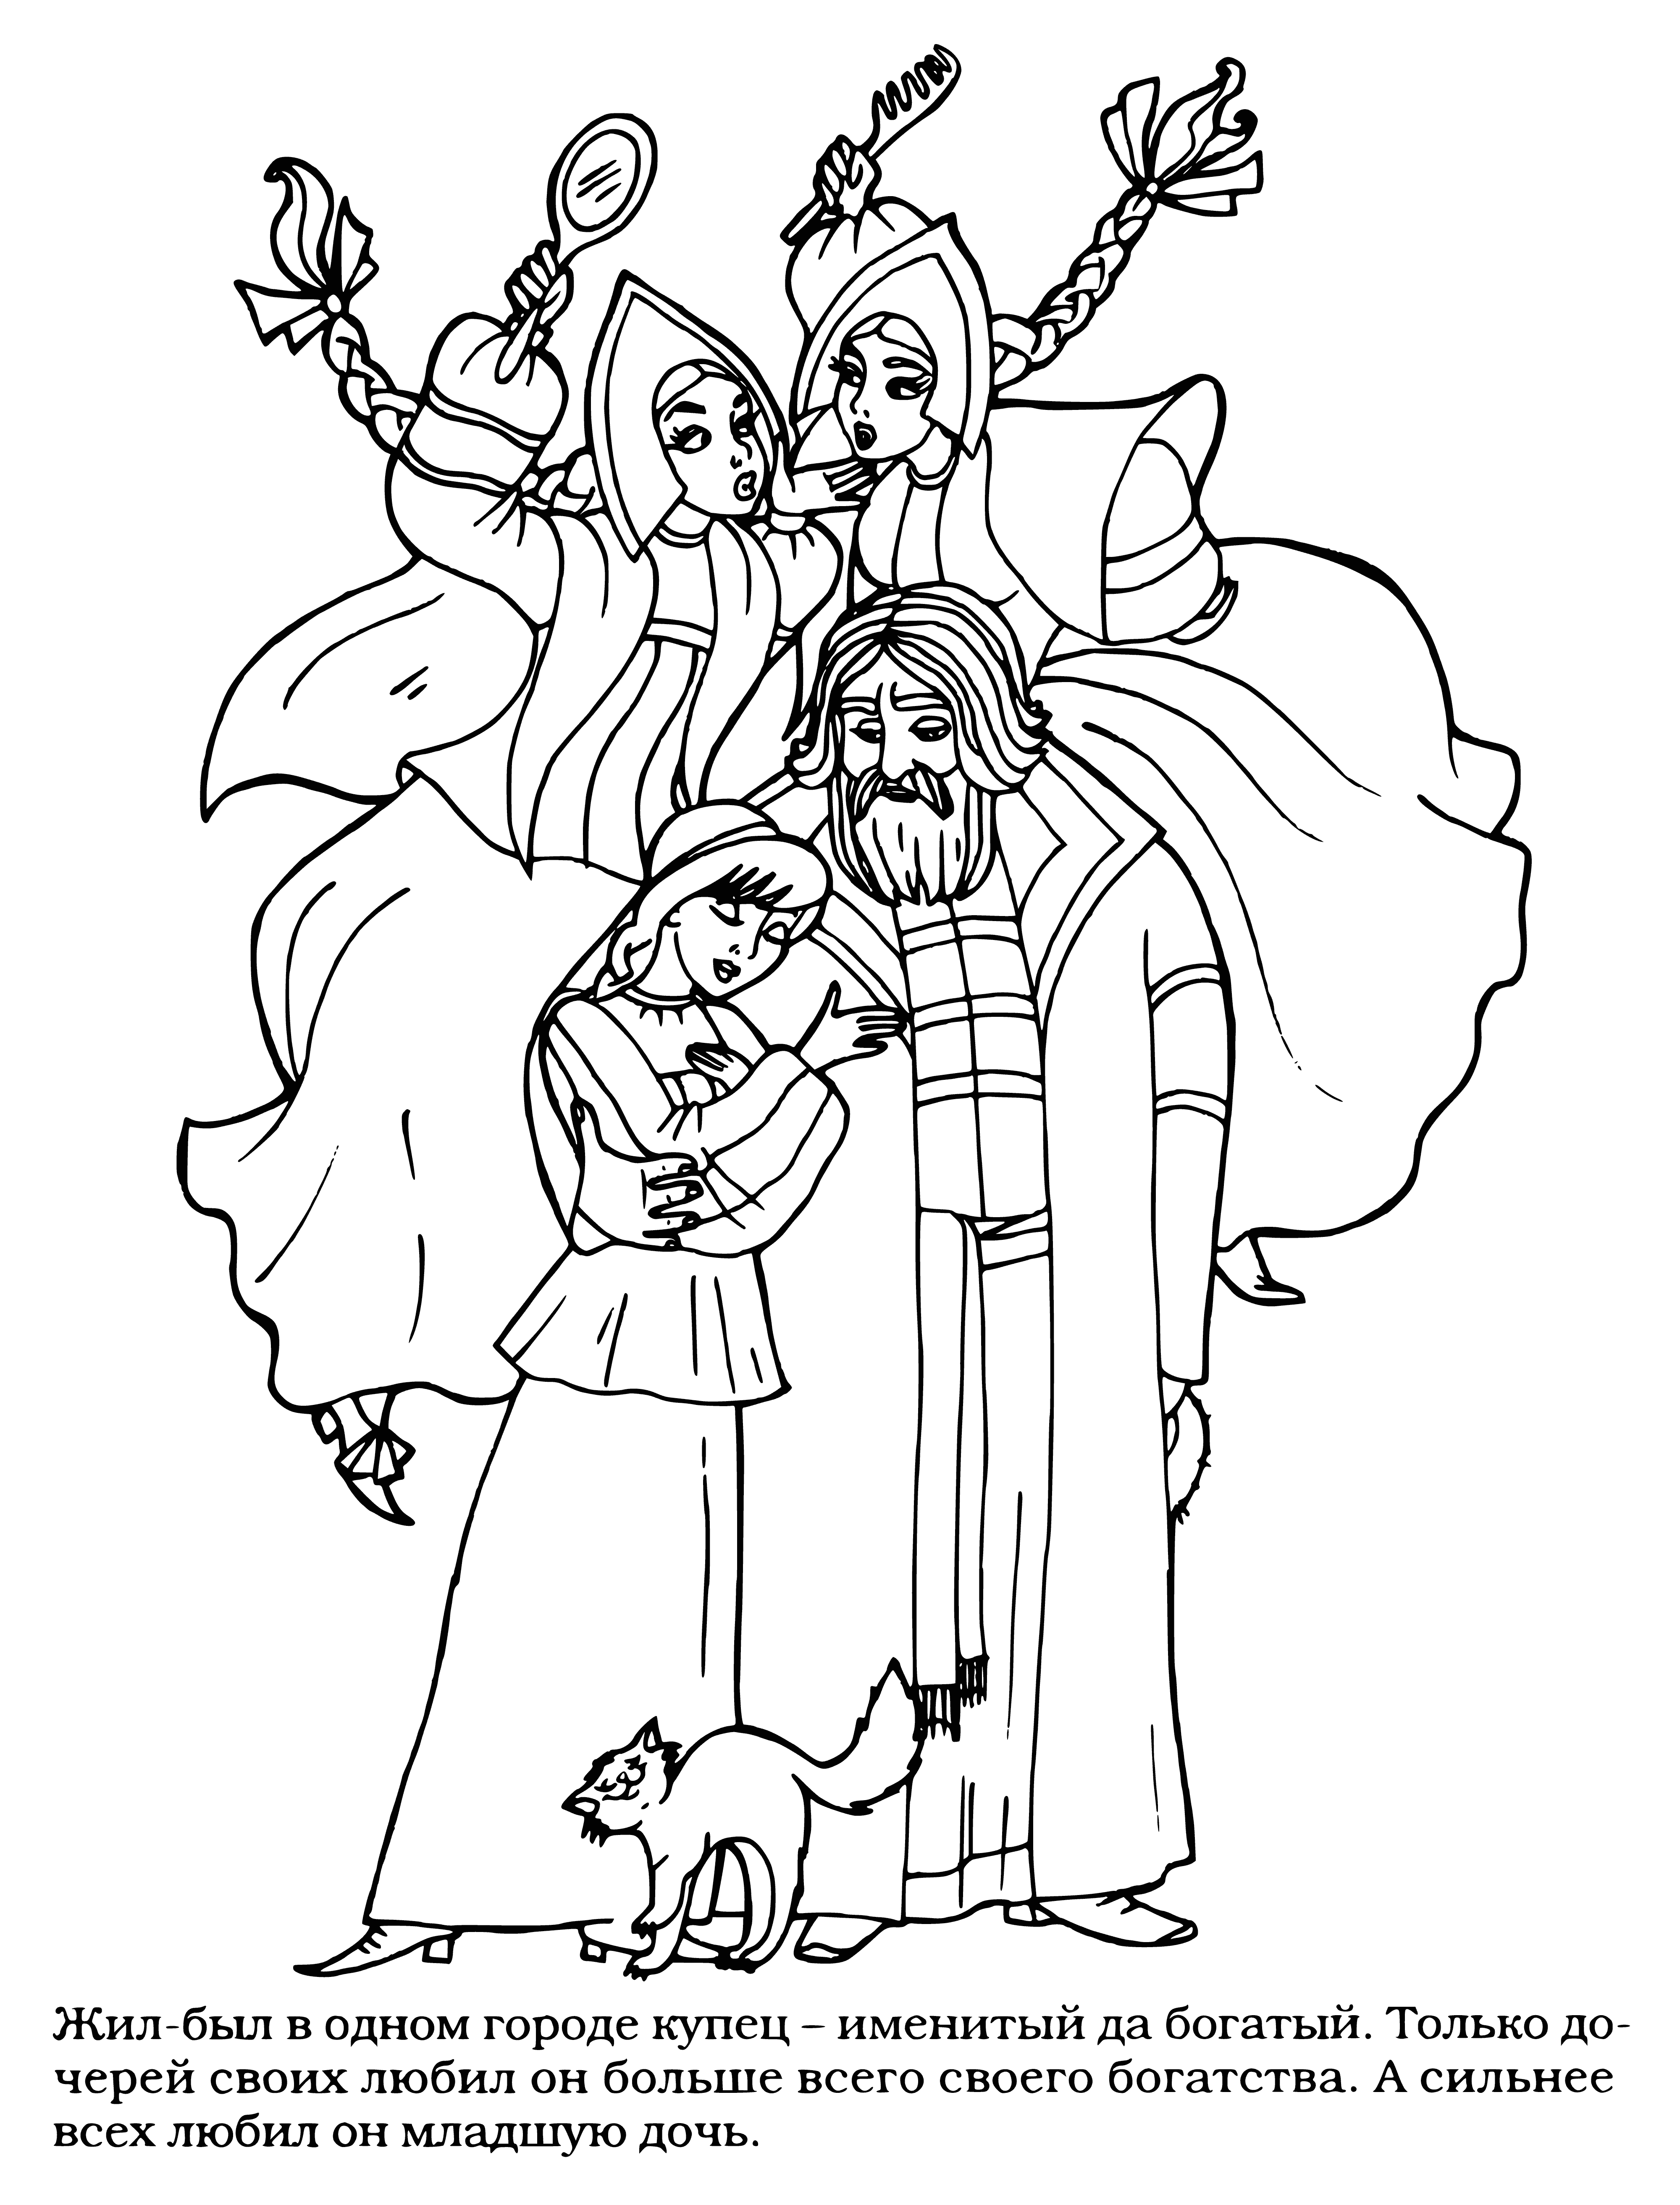 coloring page: Younger sis watches on, not bestowed a flower but pleased her older sis is crowned Scarlet Flower.